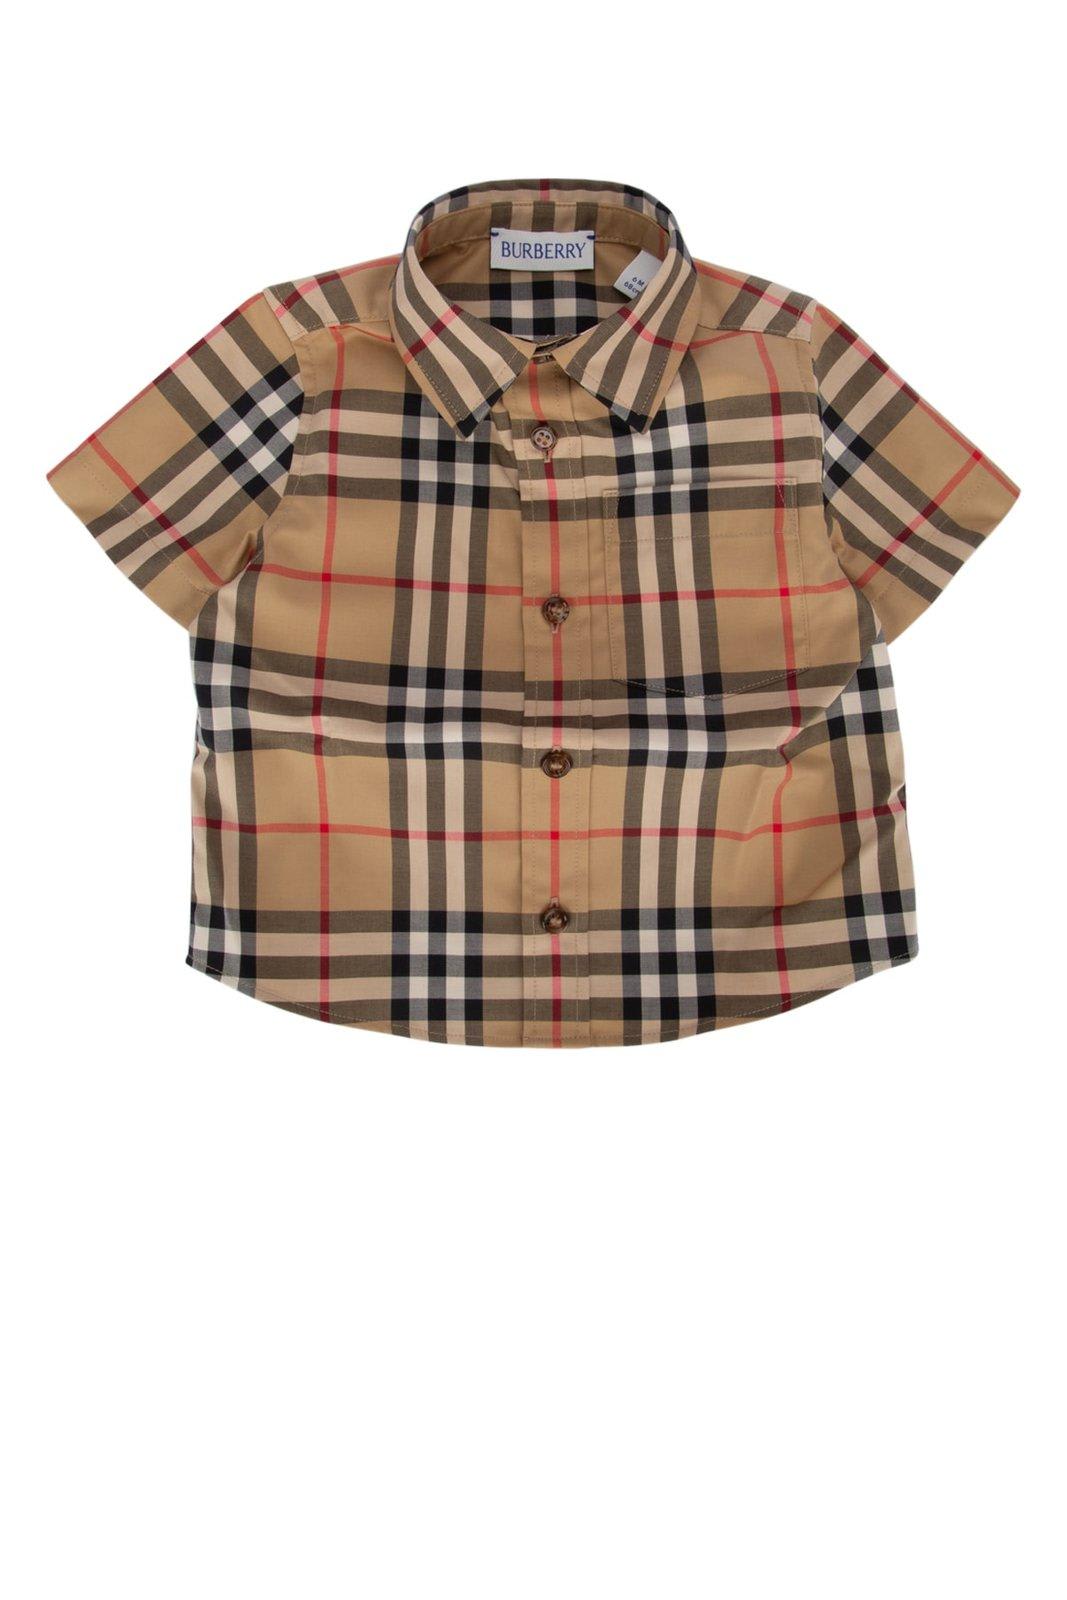 Burberry Babies' Check Pattern Short-sleeved Shirt In Archive Beige Ip Chk